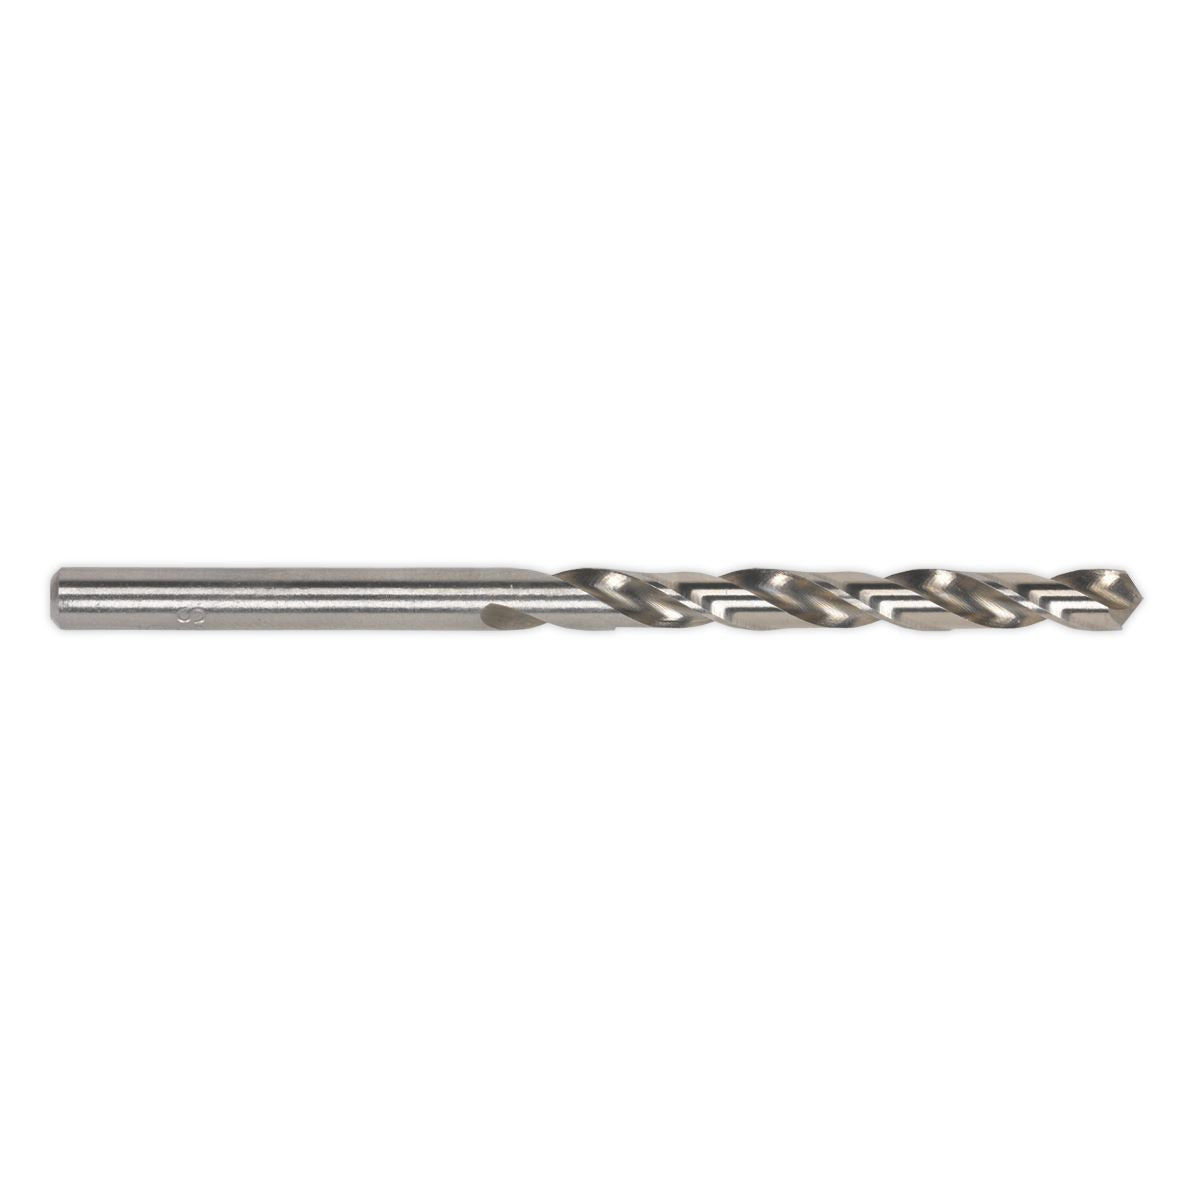 Sealey HSS Fully Ground Drill Bit 12.5mm Pack of 5